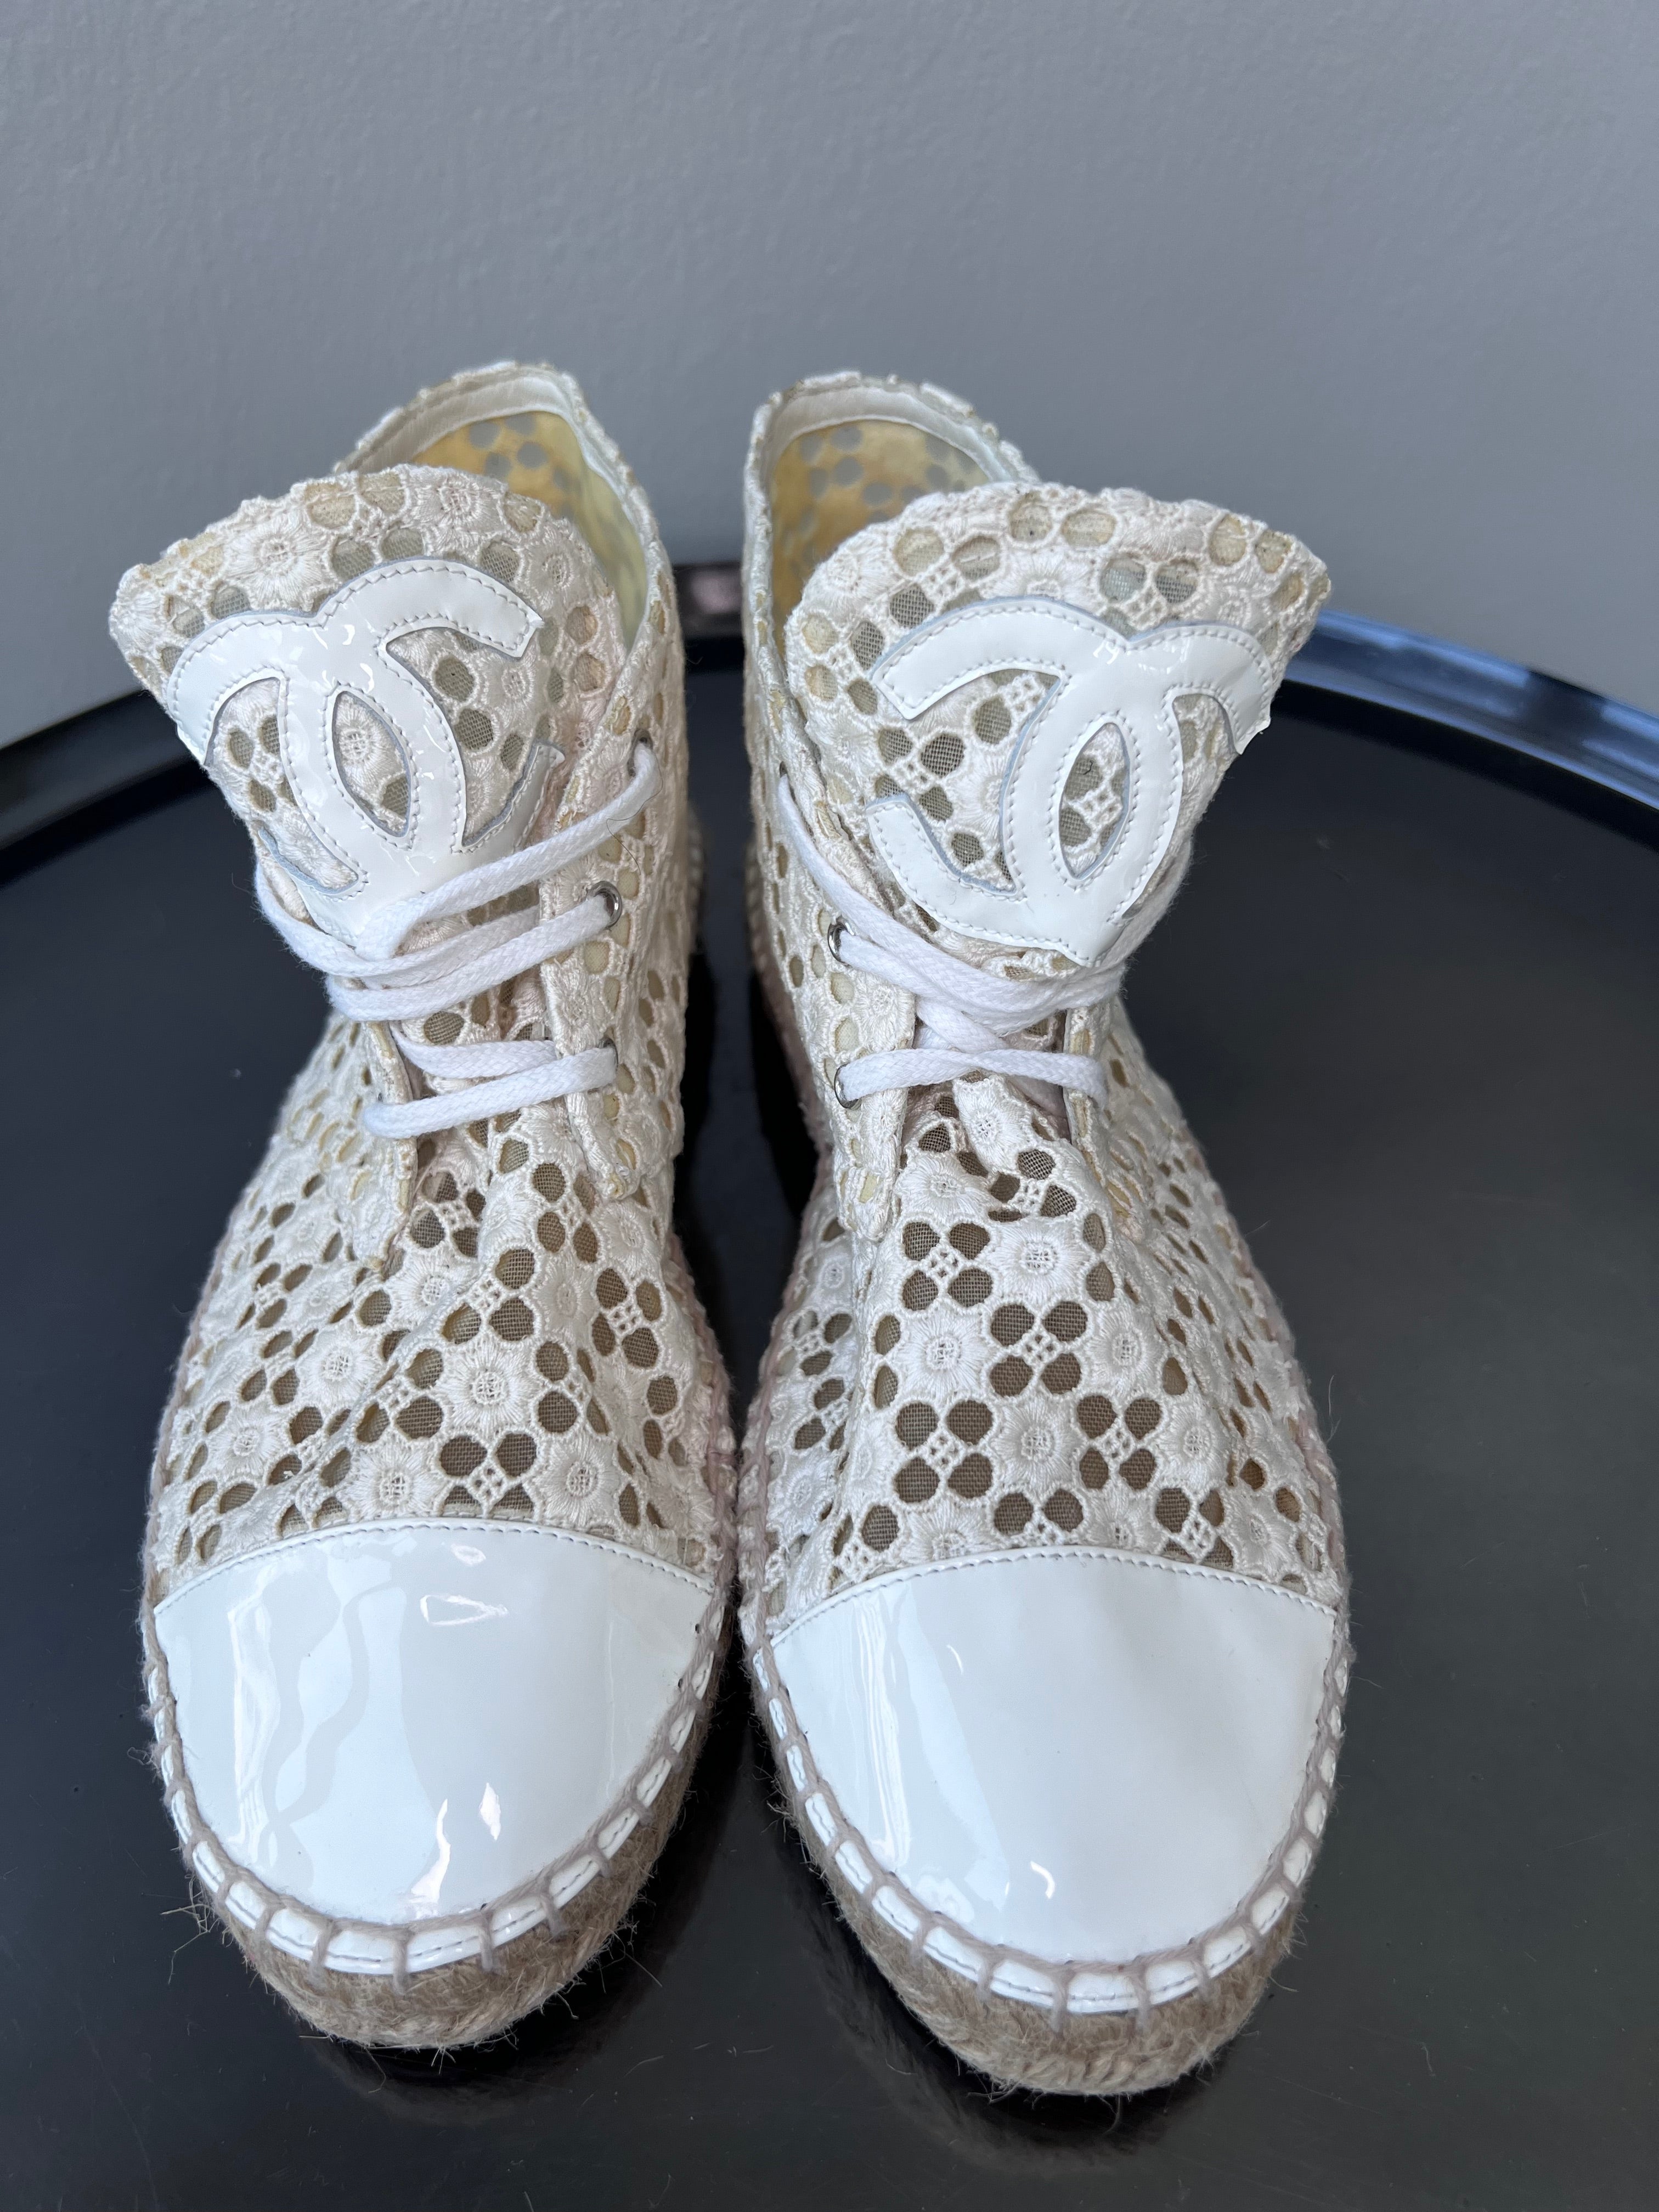 Cream eyelet lace and patent leather espadrilles - CHANEL